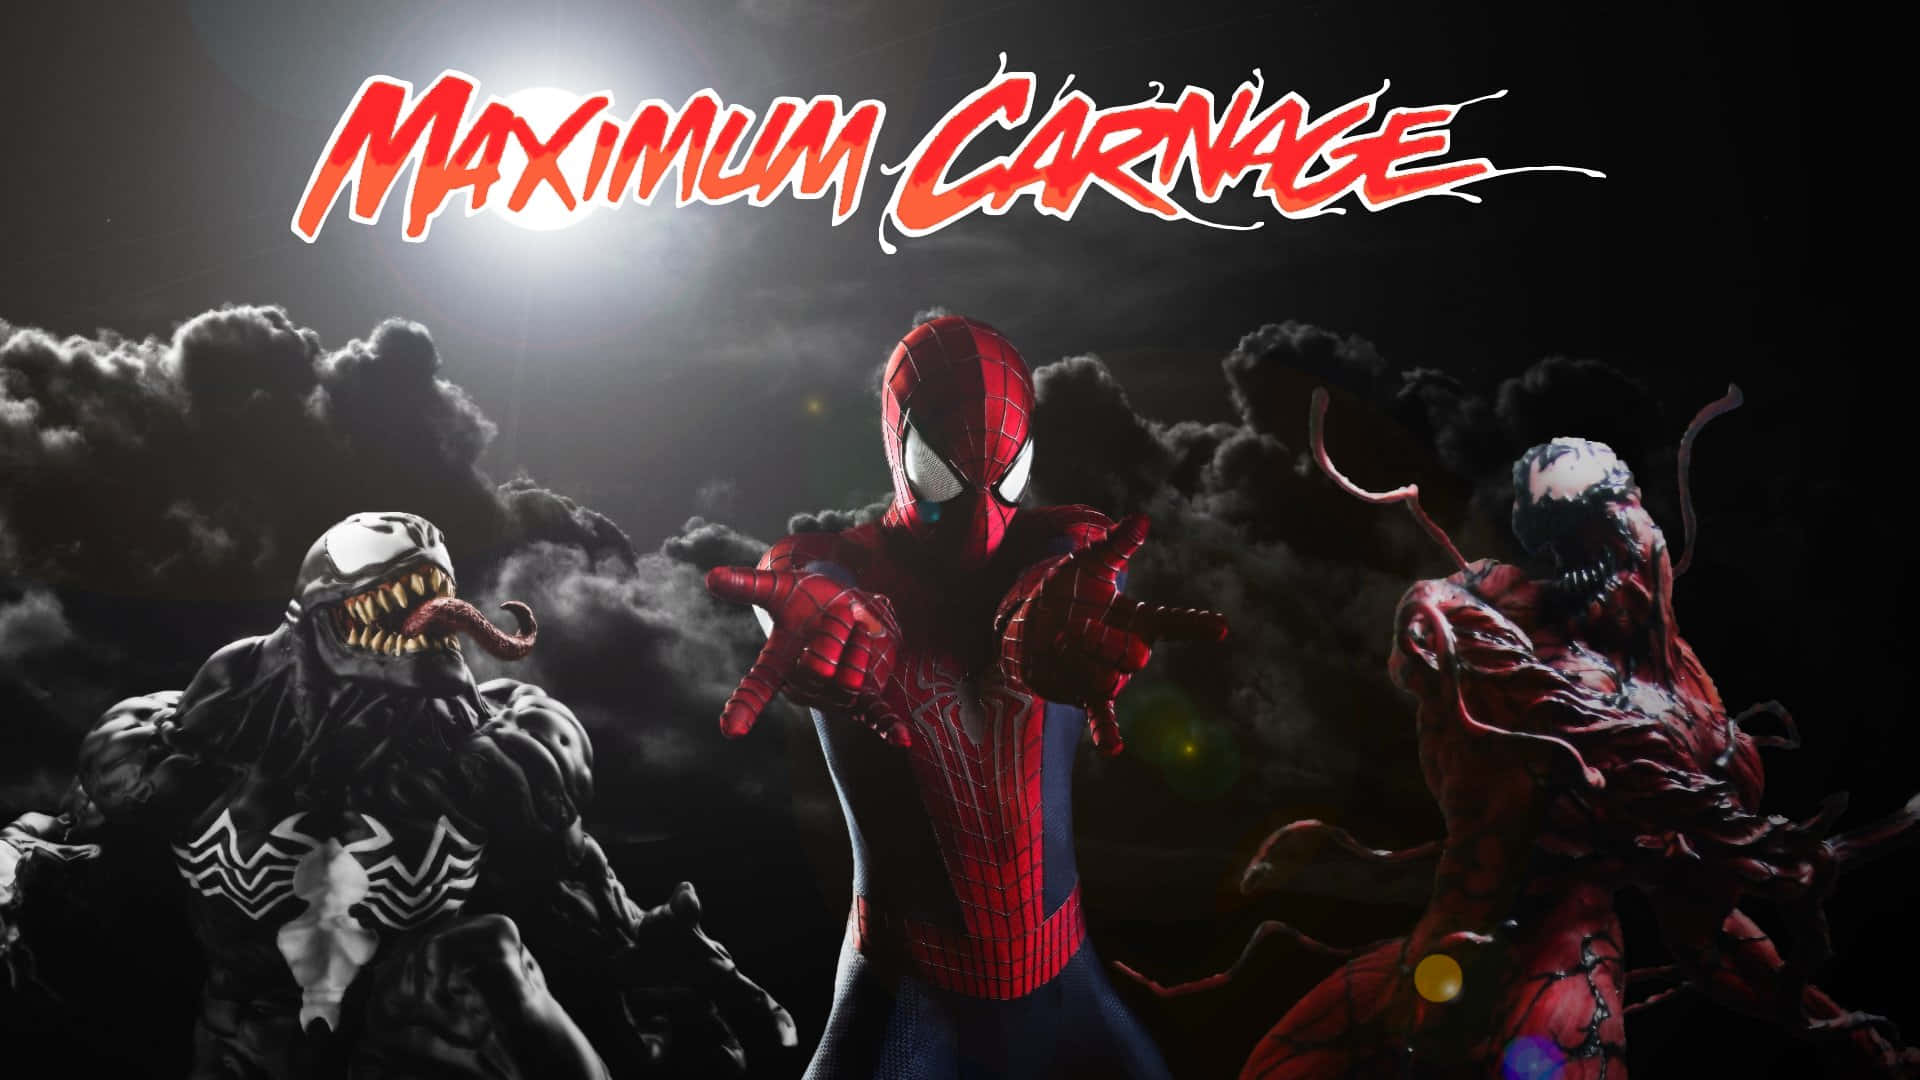 Heroes and villains in epic Maximum Carnage showdown Wallpaper